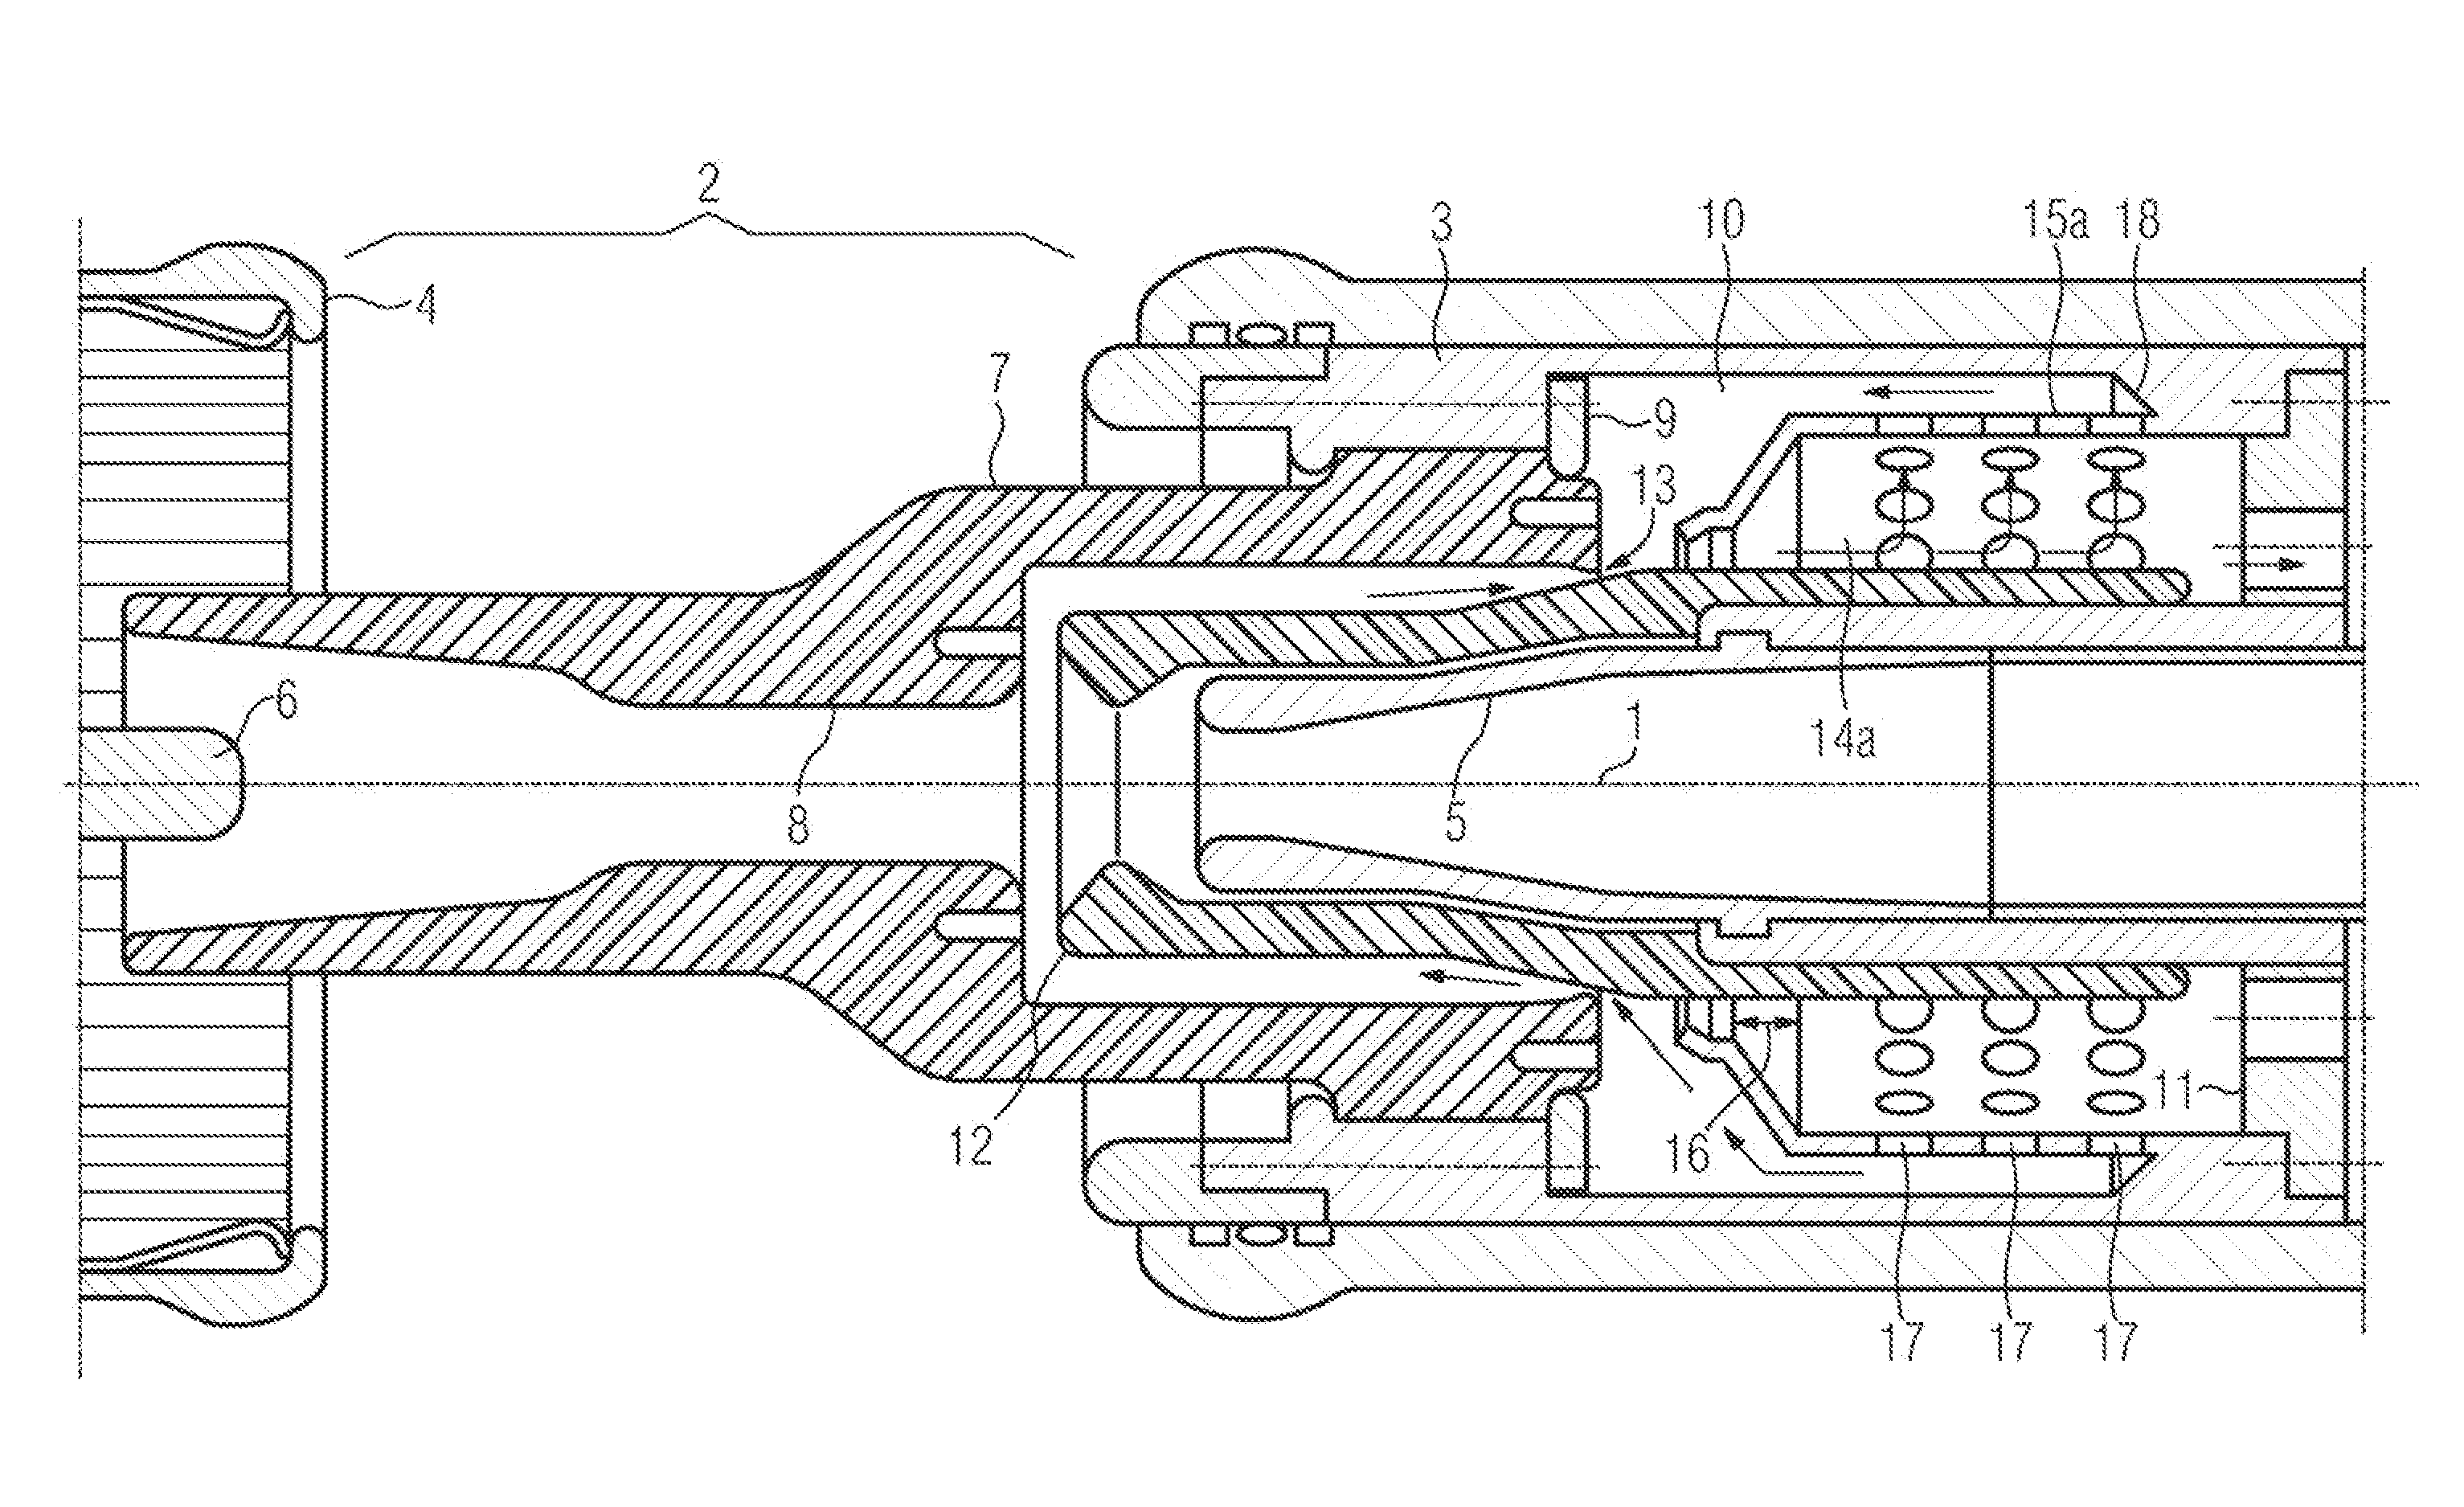 Switchgear assembly with a contact gap